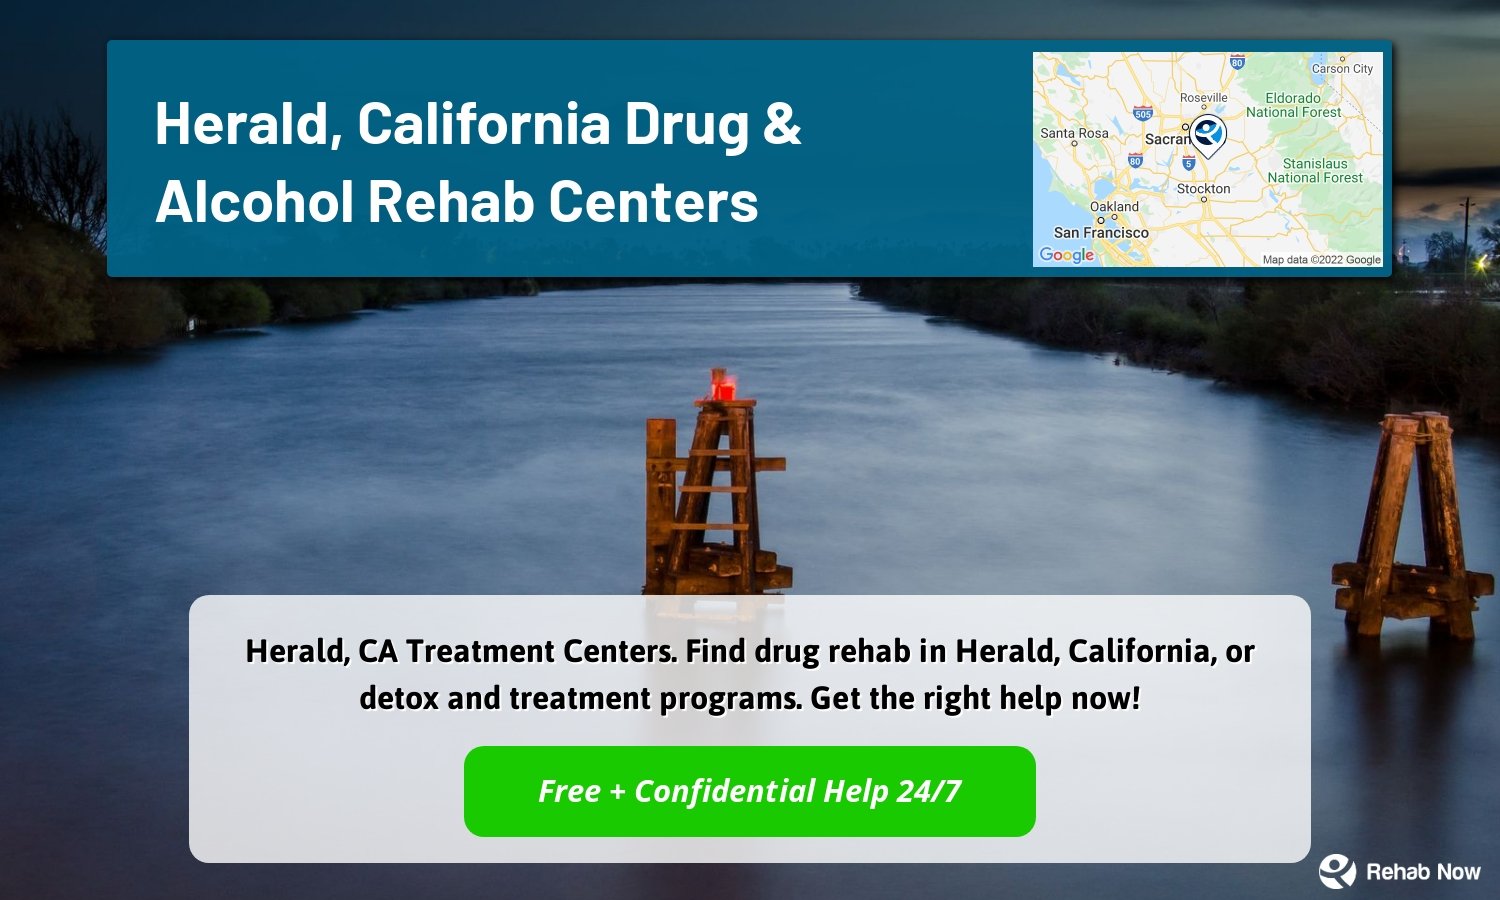 Herald, CA Treatment Centers. Find drug rehab in Herald, California, or detox and treatment programs. Get the right help now!